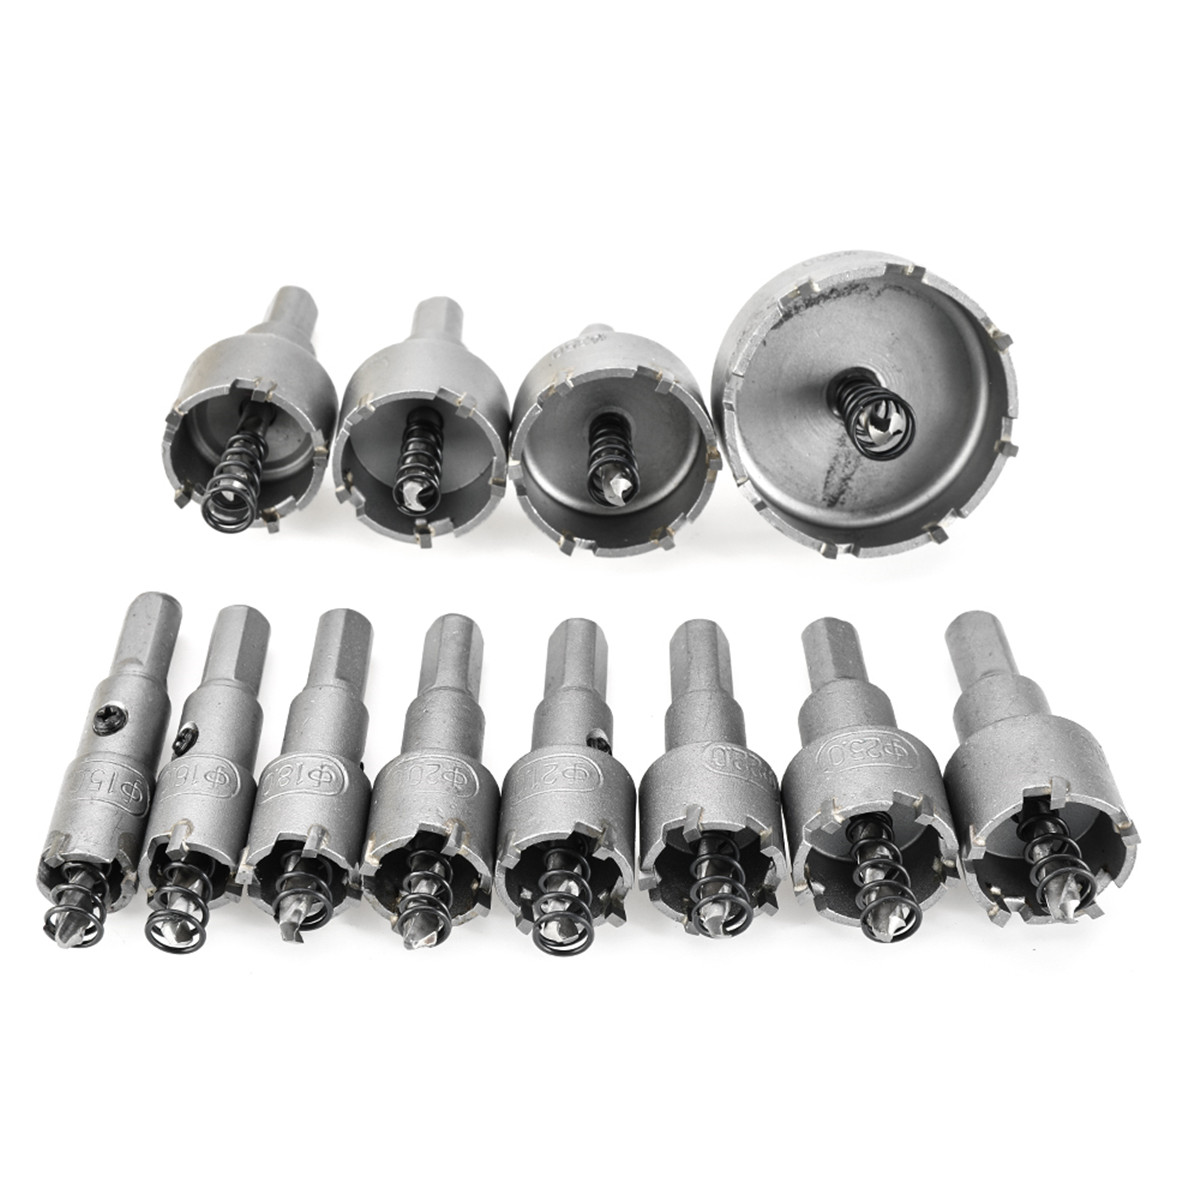 Find Drillpro 12pcs 15mm 50mm Hole Saw Cutter Alloy Drill Bit Set for Wood Metal Cutting for Sale on Gipsybee.com with cryptocurrencies